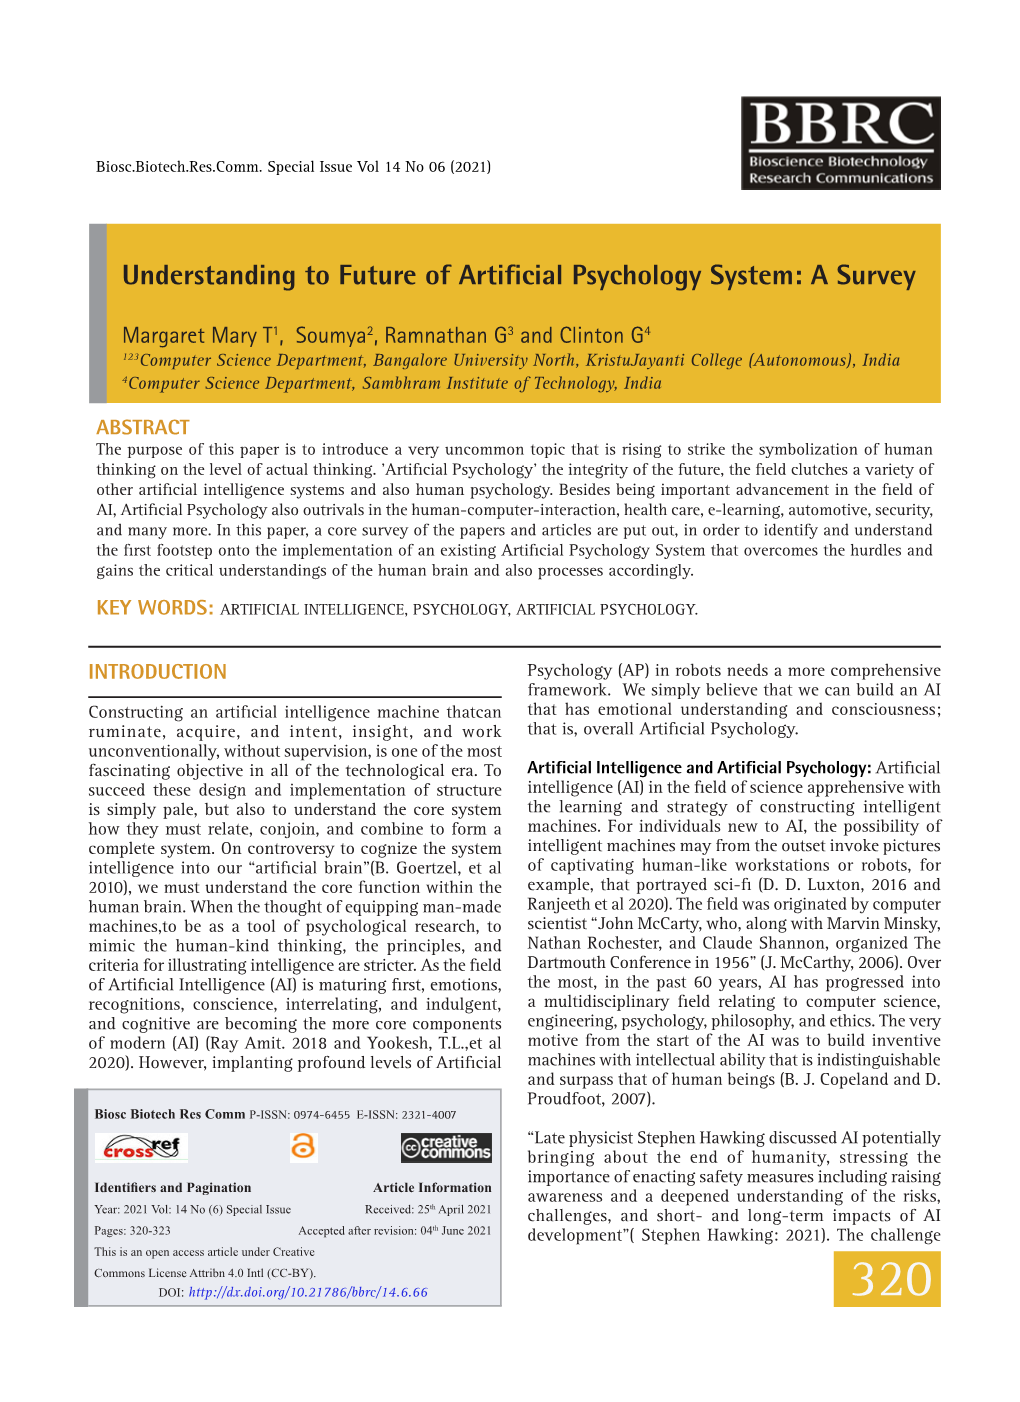 Understanding to Future of Artificial Psychology System: a Survey